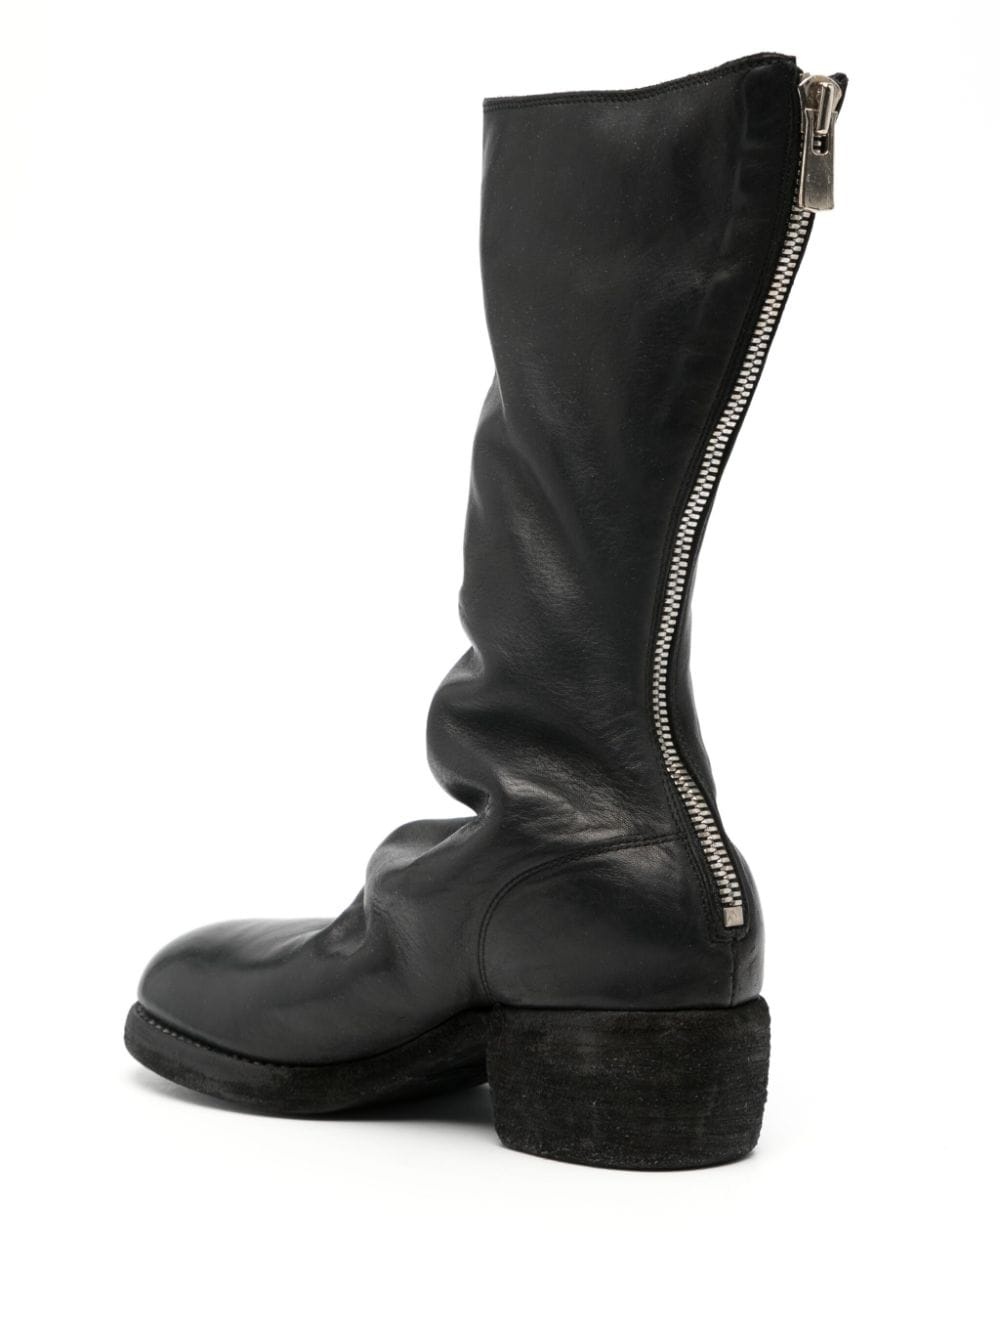 45mm leather boots - 3